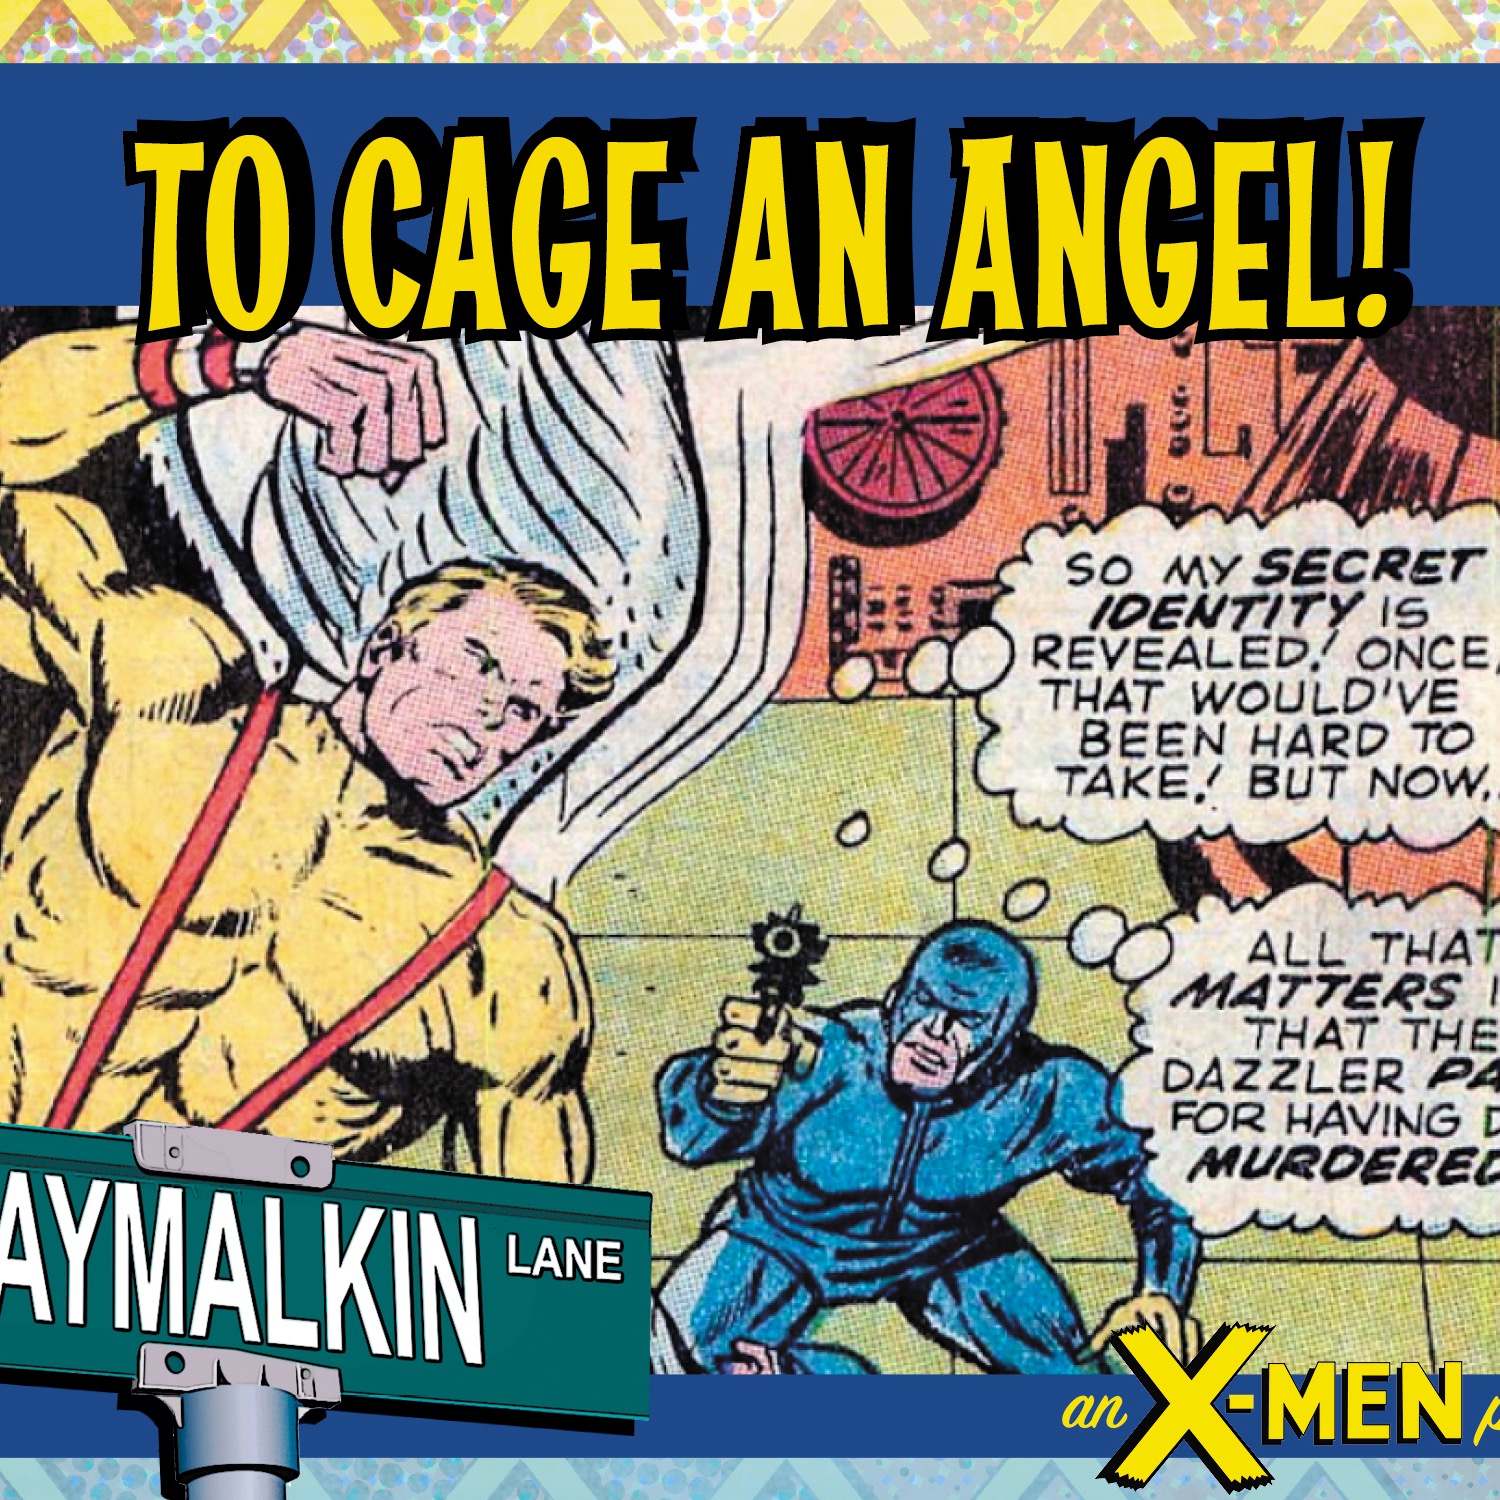 Marvel Tales #30: To Cage an Angel! Featuring Stuart Moore! With Austin Gorton and Kurt Sasso!